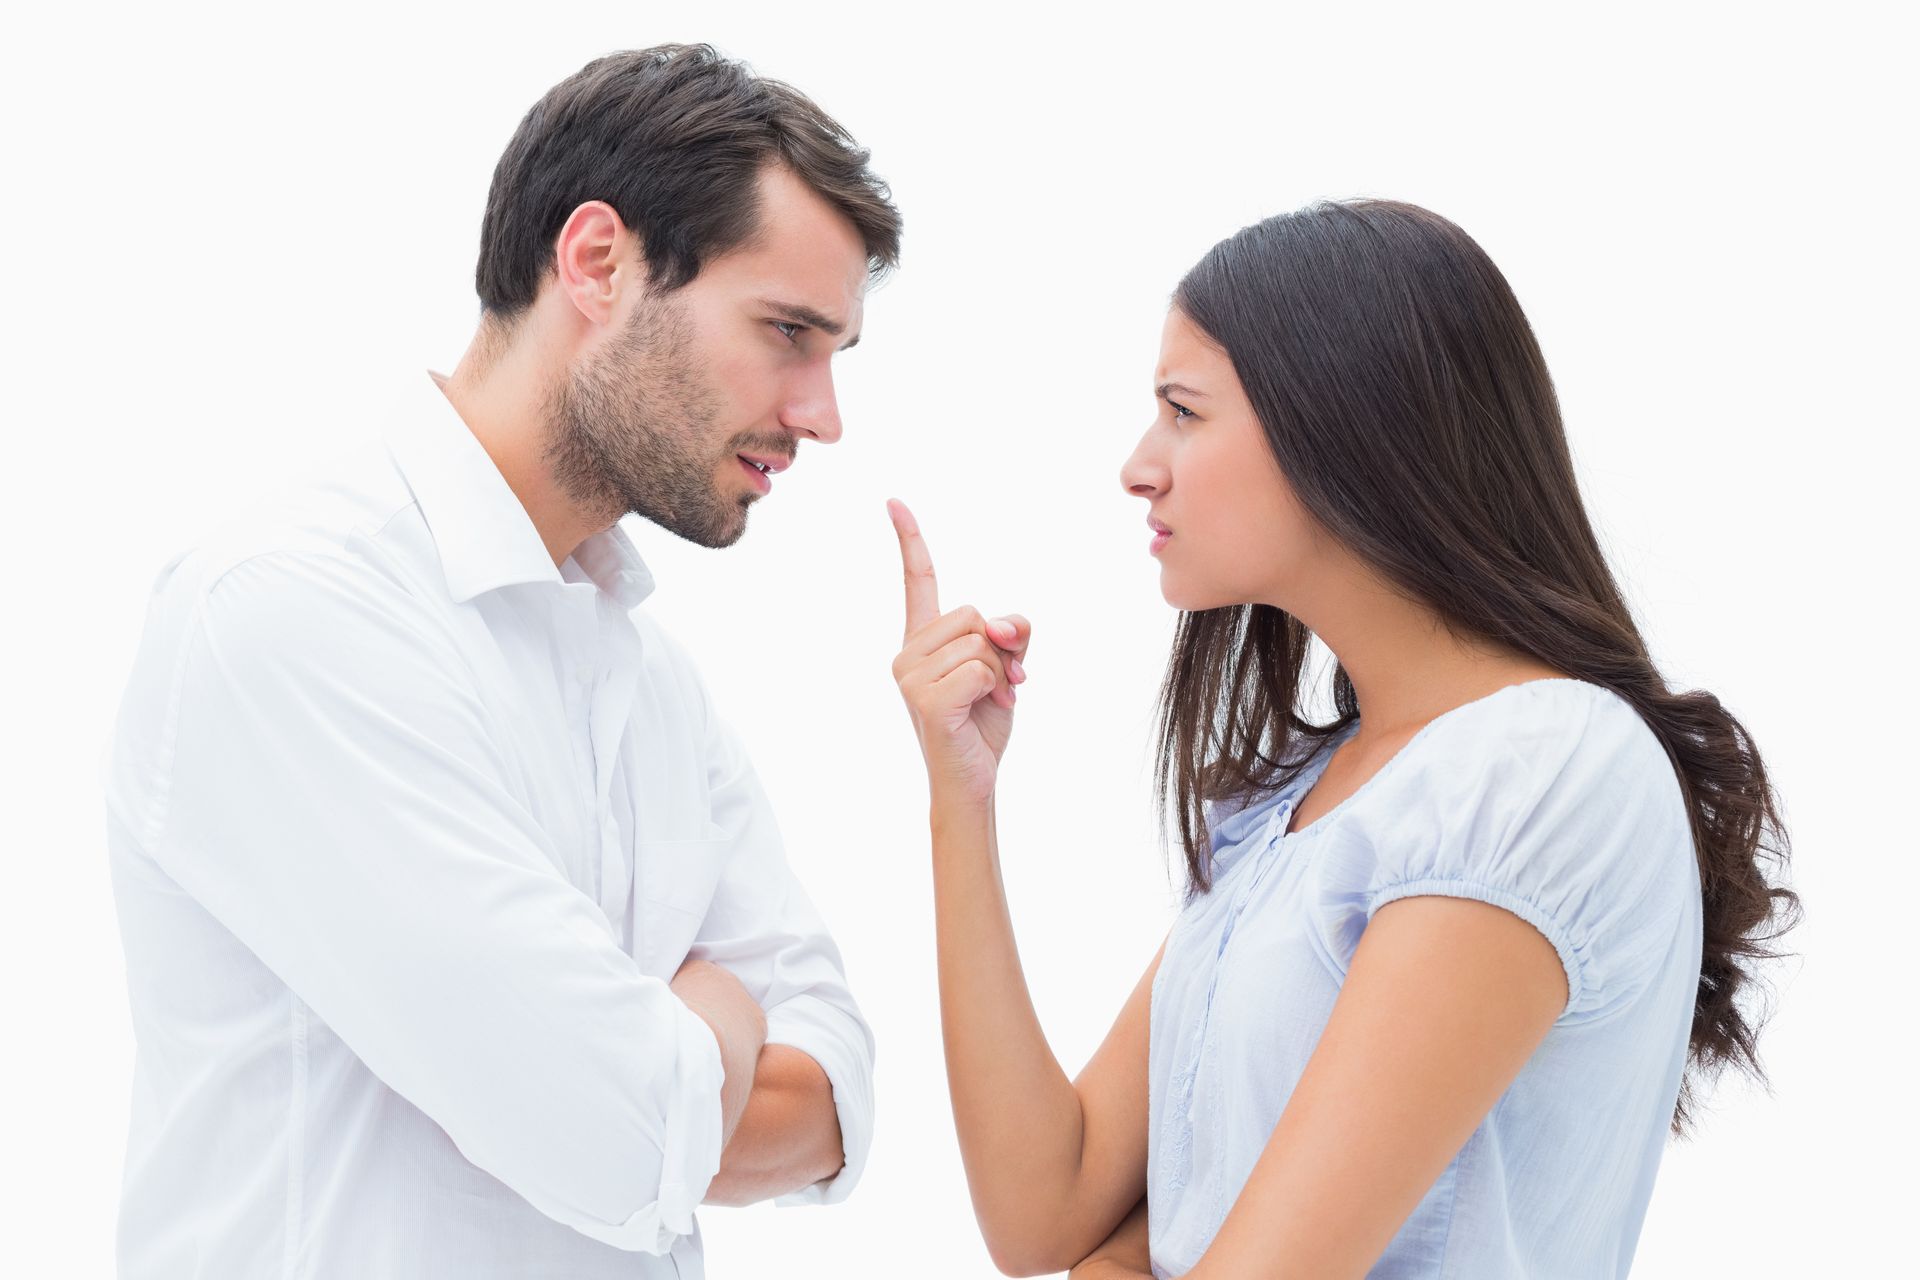 An Image of a man wearing a white shirt and a woman in a blue shirt who is pointing her finger at the man